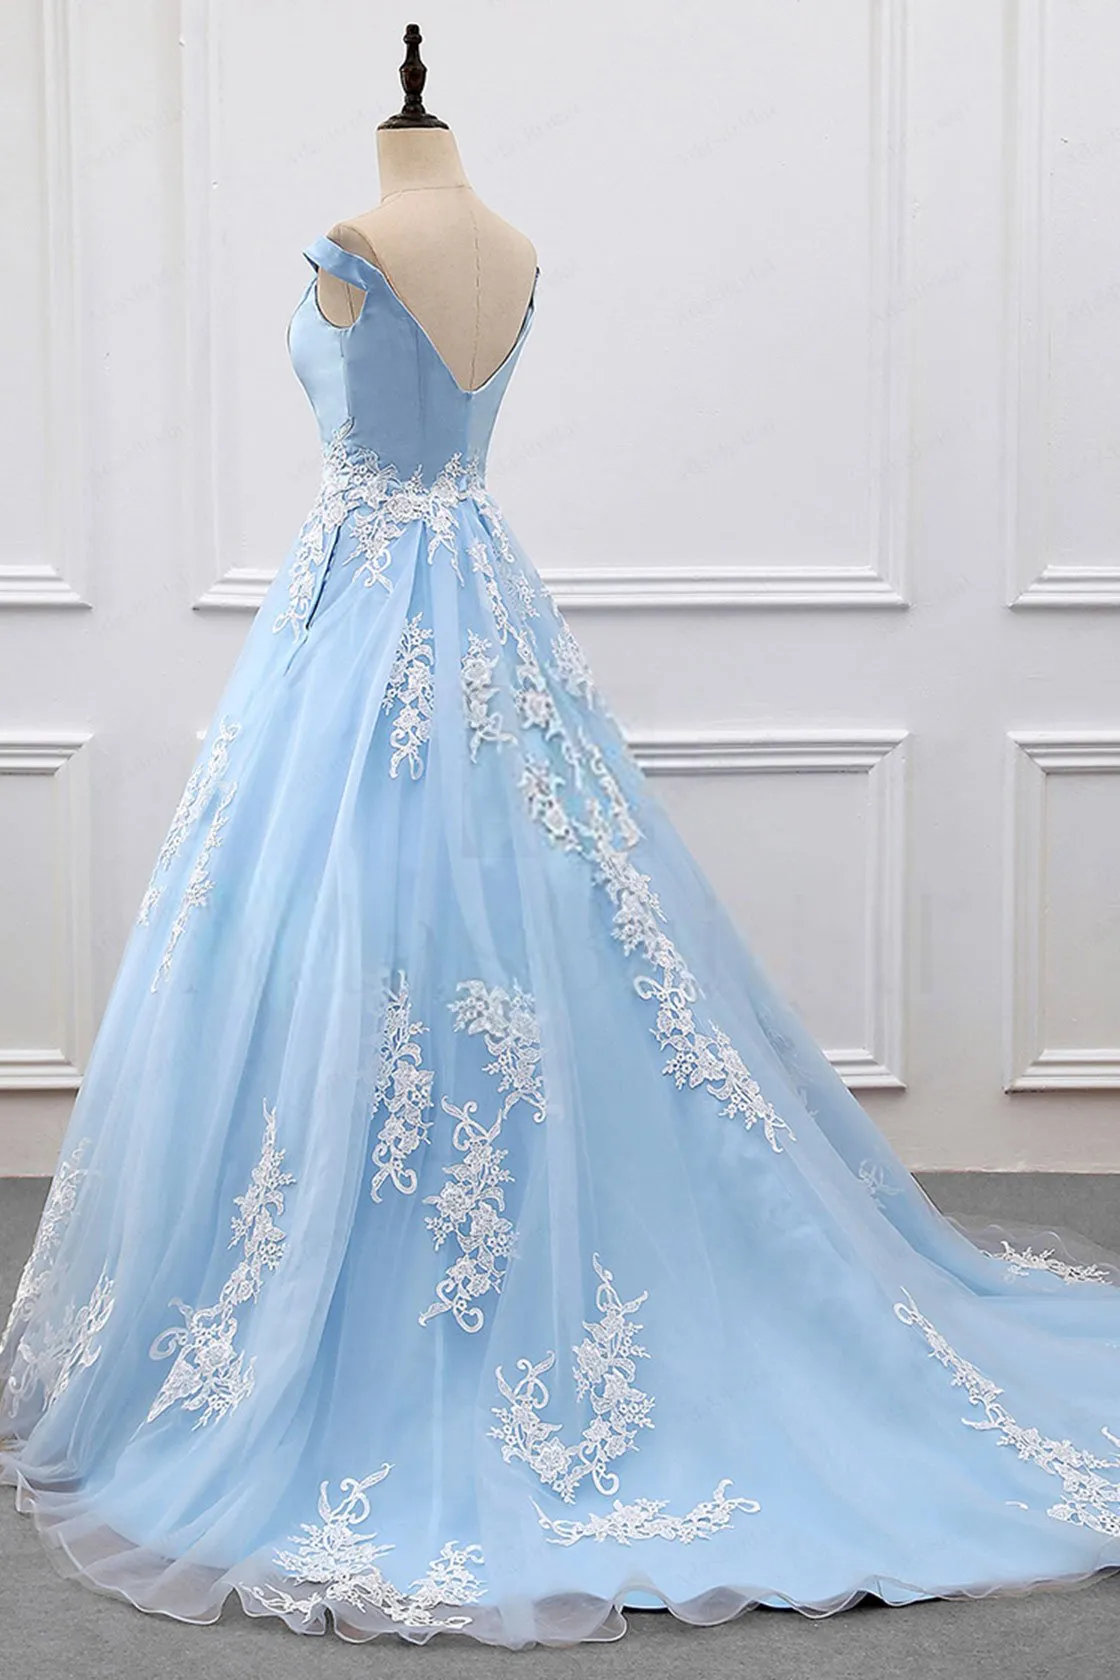 Actual Image Elegant Baby Blue With Ivory Lace Applique Dresses Evening Party Wear Off shoulder Sleeves Organza Formal Prom Gowns Long